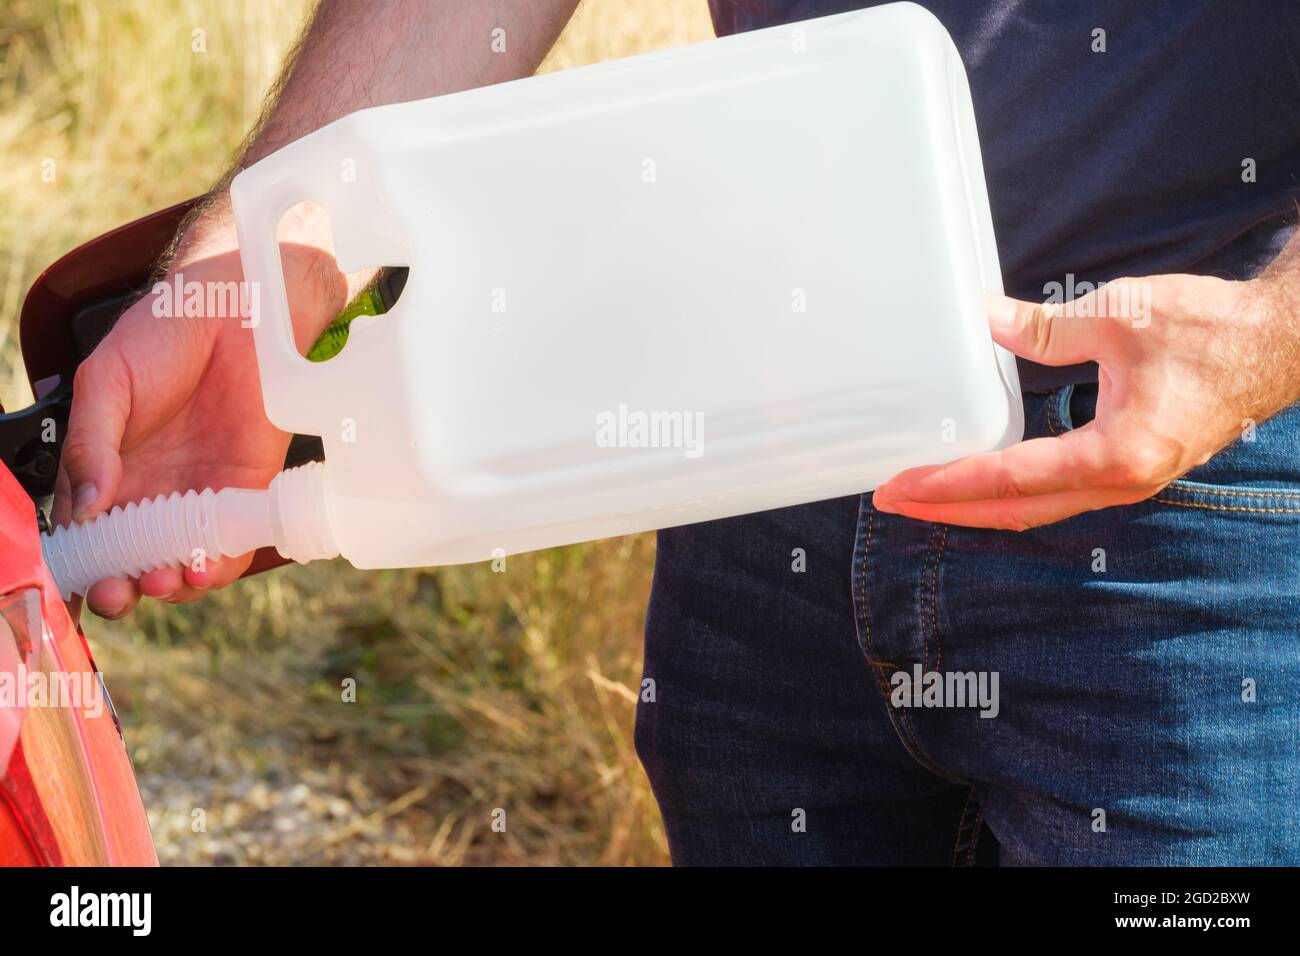 Man filling up fuel or diesel into the gas tank from canister in the field.  Stock Photo